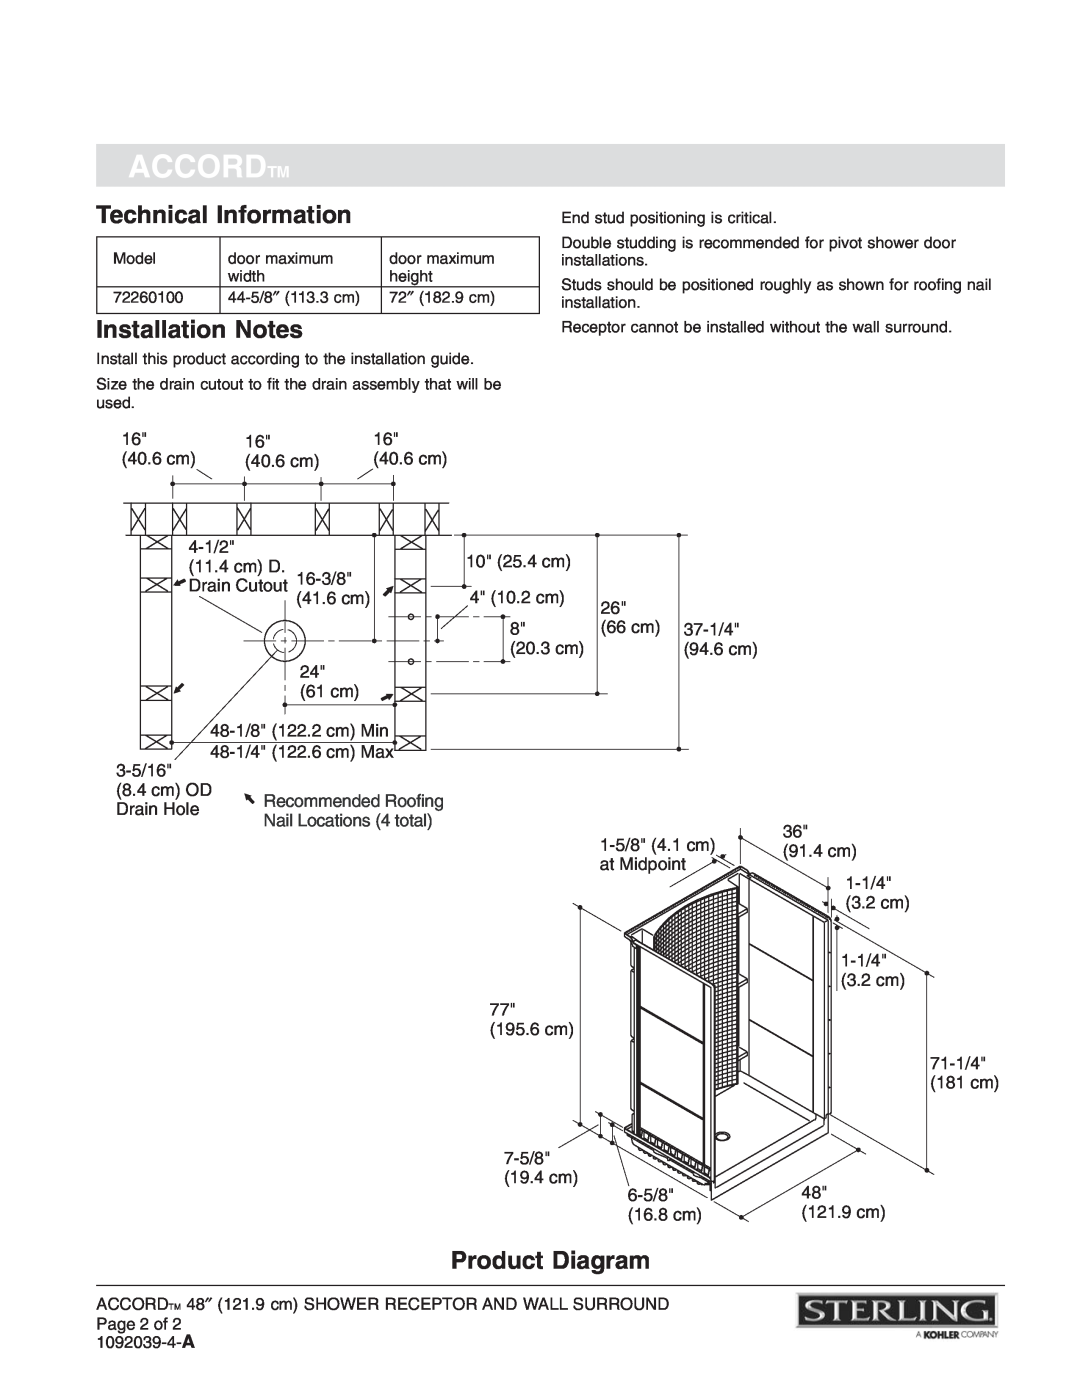 Sterling Plumbing 72260100 warranty Technical Information, Installation Notes, Product Diagram, Accordtm 